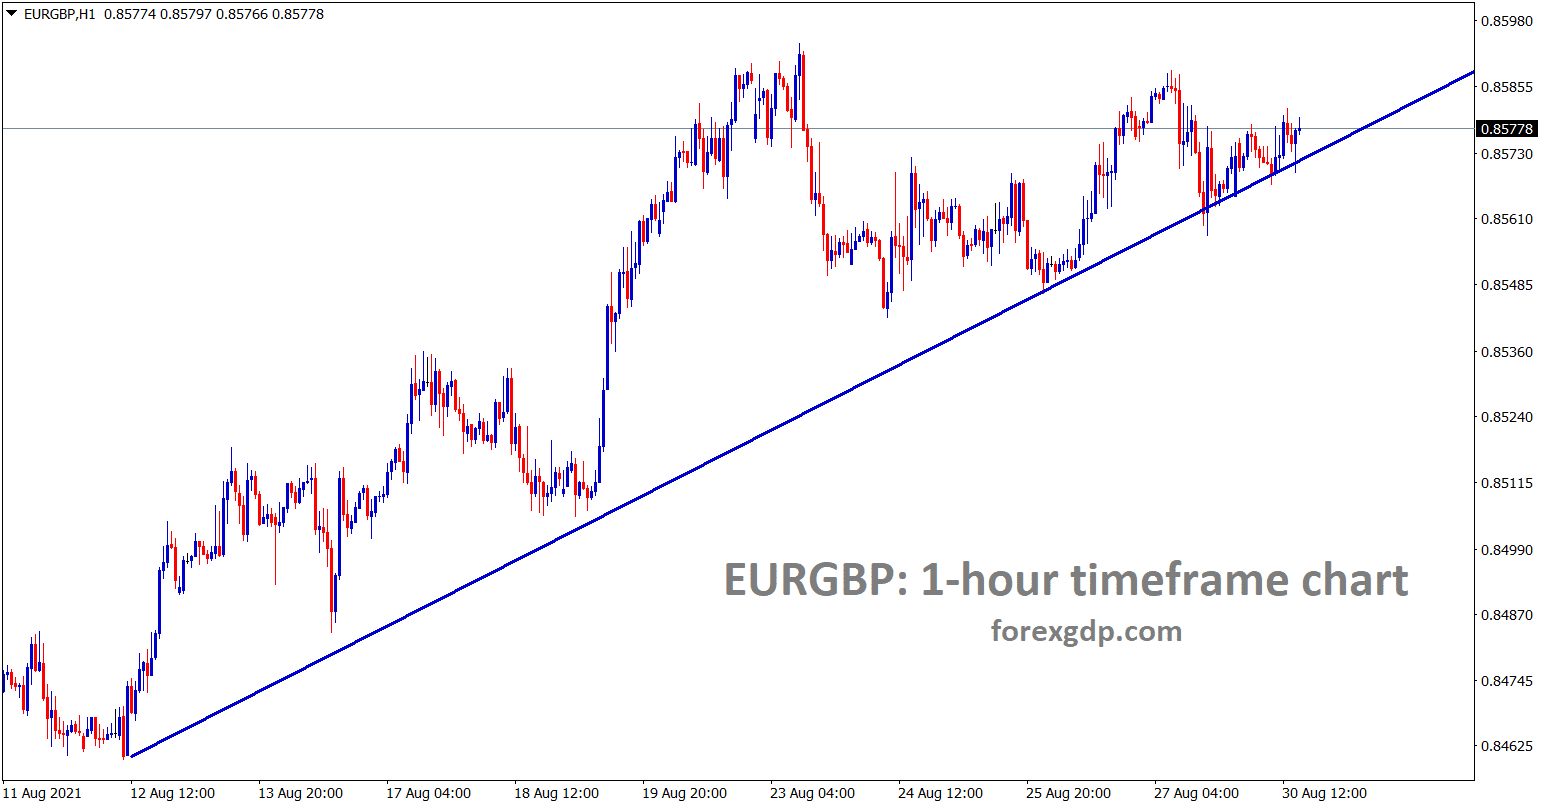 EURGBP is moving in an uptrend line forming continuous lows